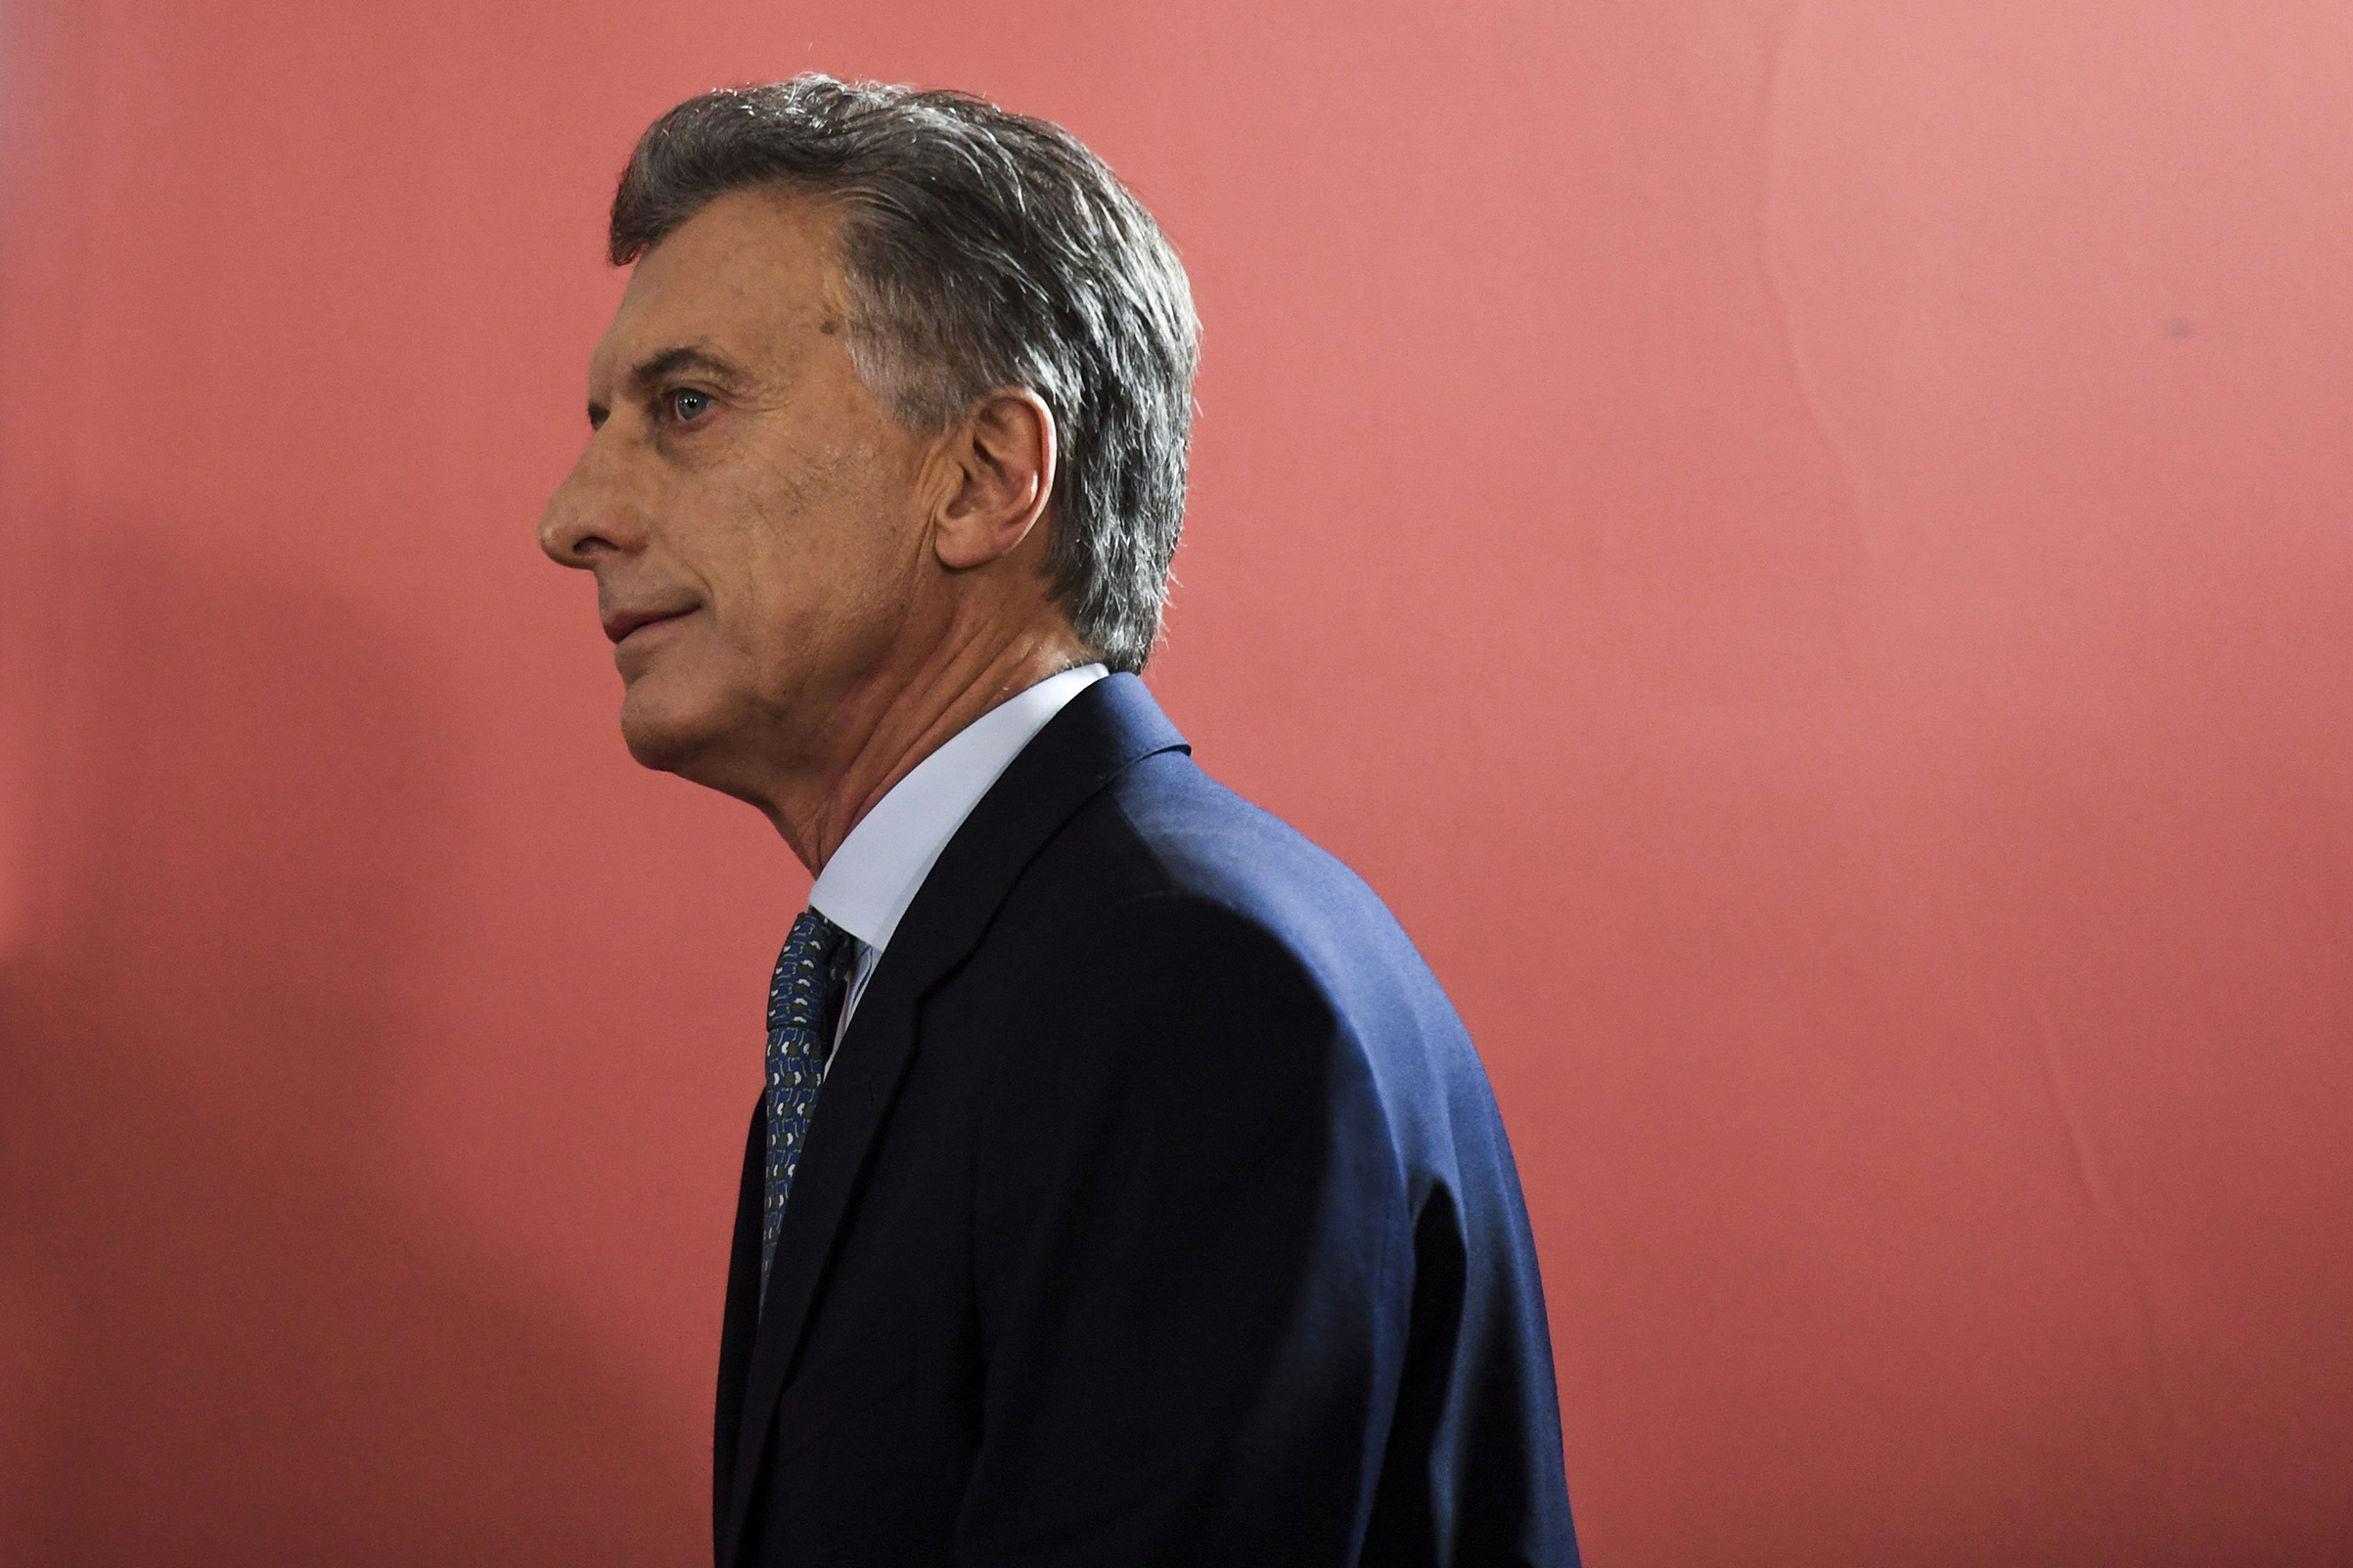 Argentina's President Mauricio Macri arrives to deliver a statement at Casa Rosada government palace in Buenos Aires, on September 27, 2018. (Eitan Abramovich—AFP/Getty Images)